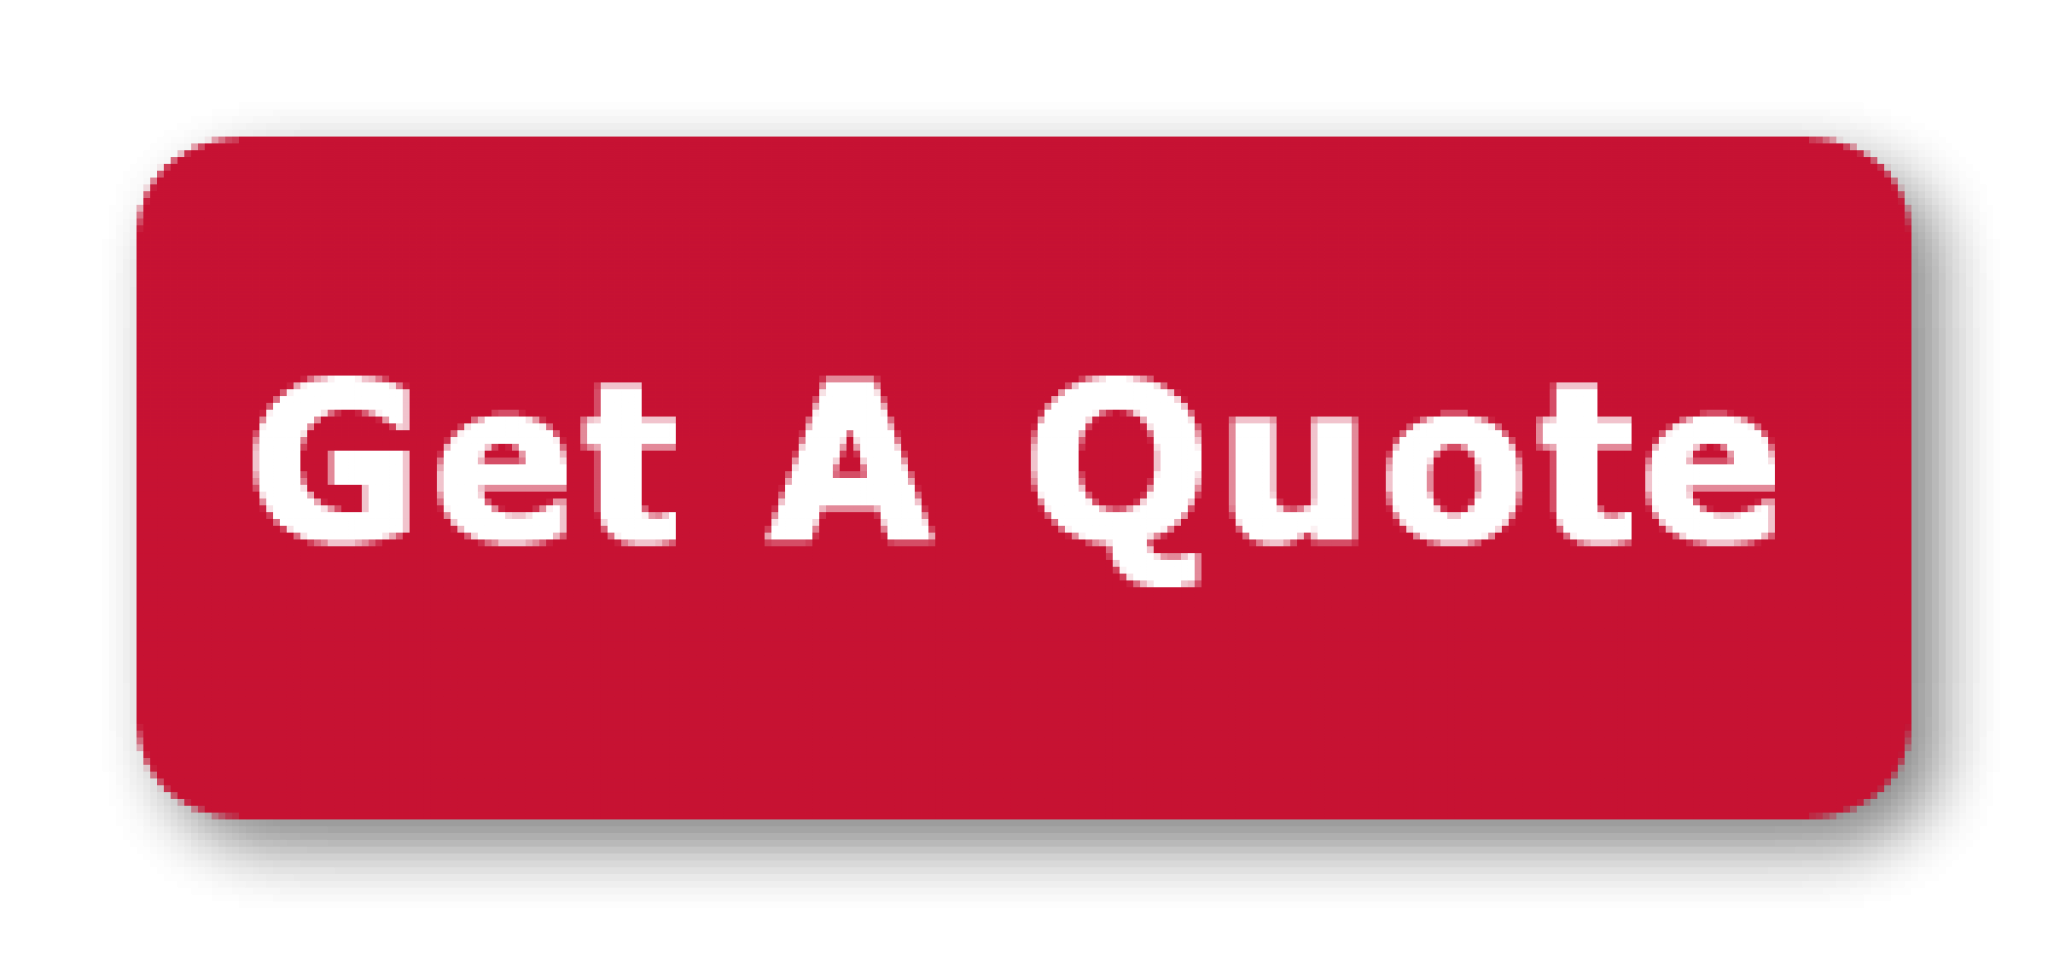 Get a quote. Get a Veige. Quote button. Get a quote перевод. Get do ru